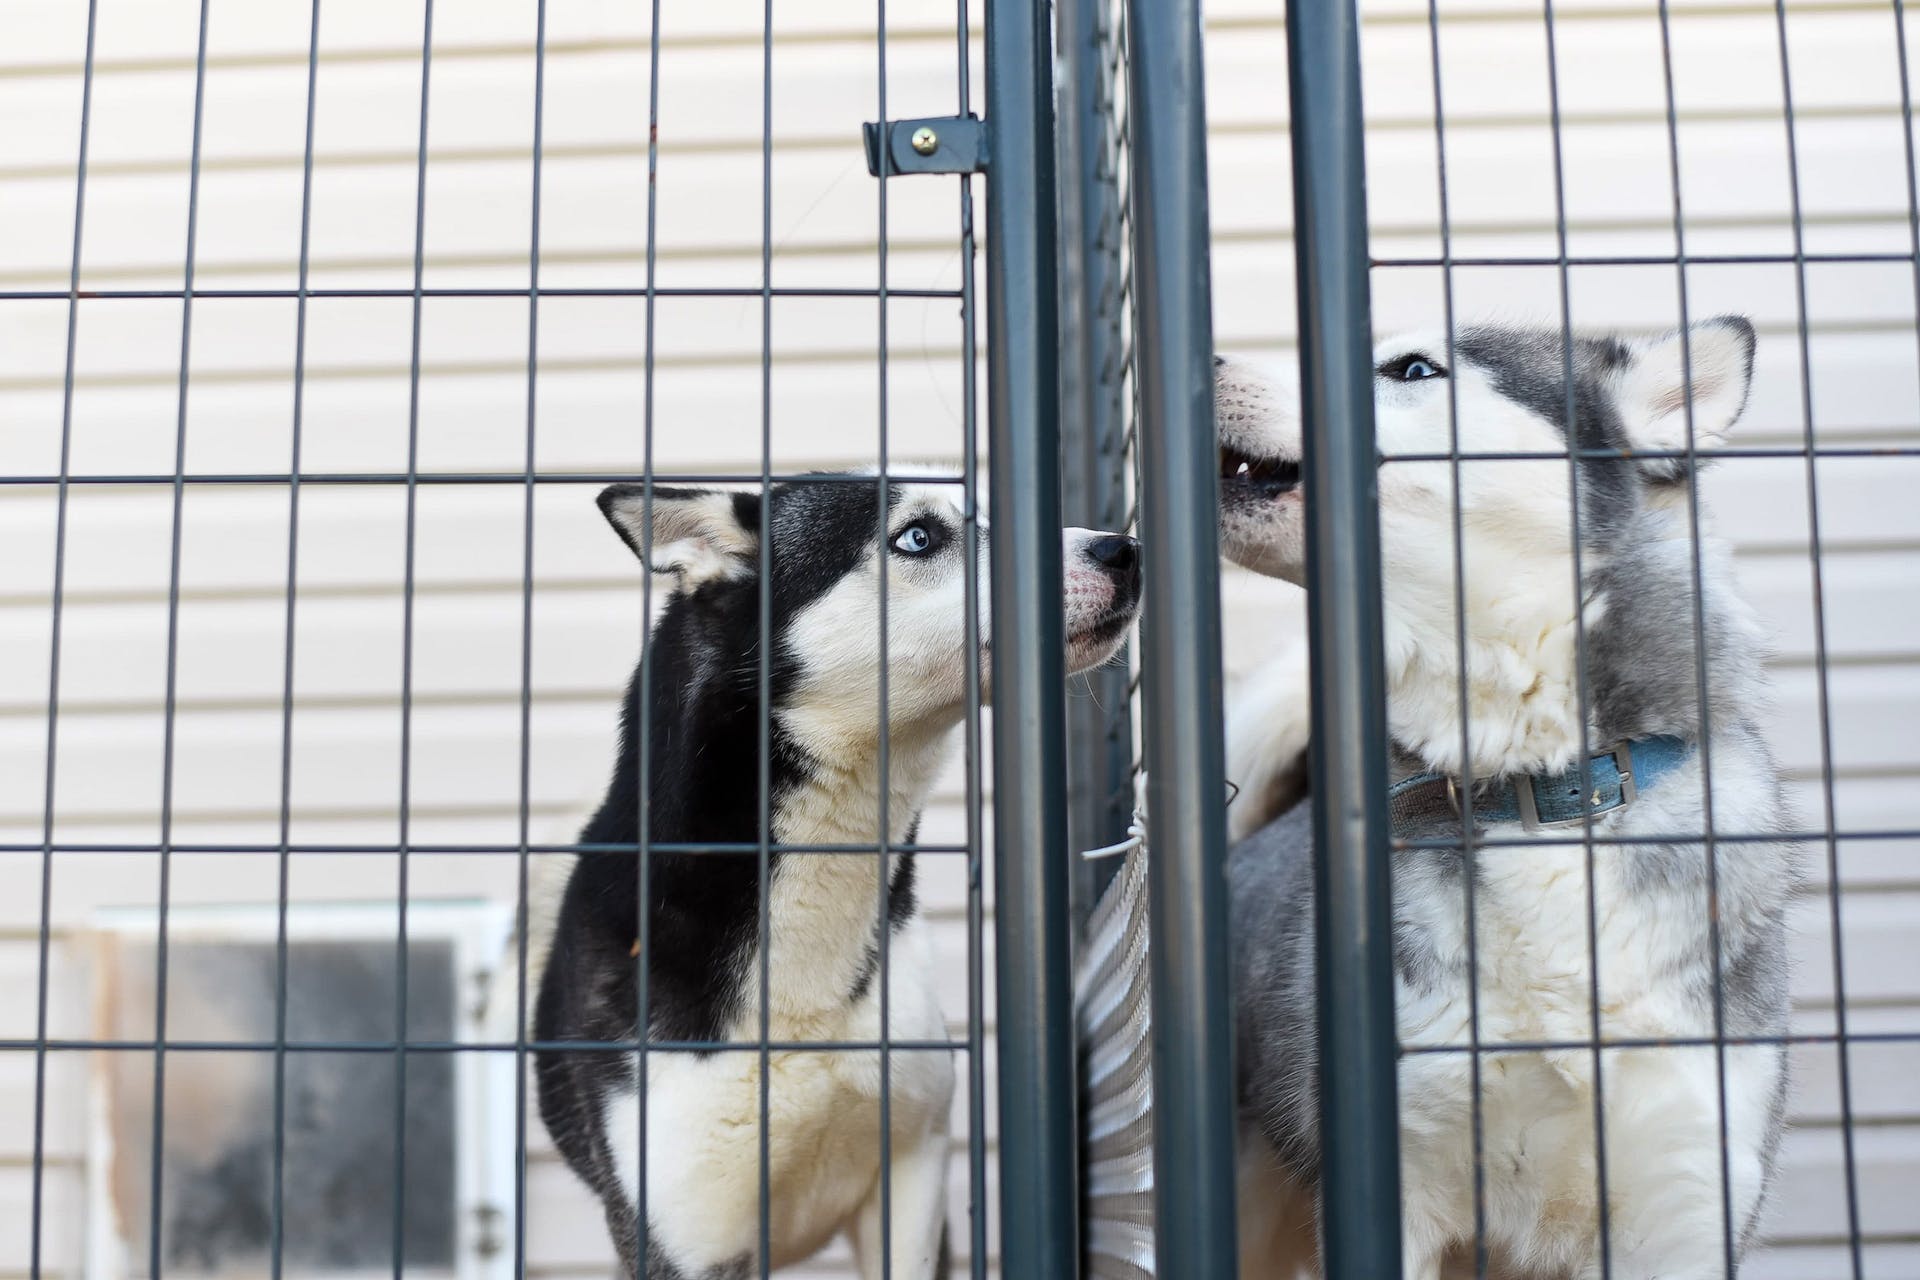 Two dogs inside a cage at an animal shelter